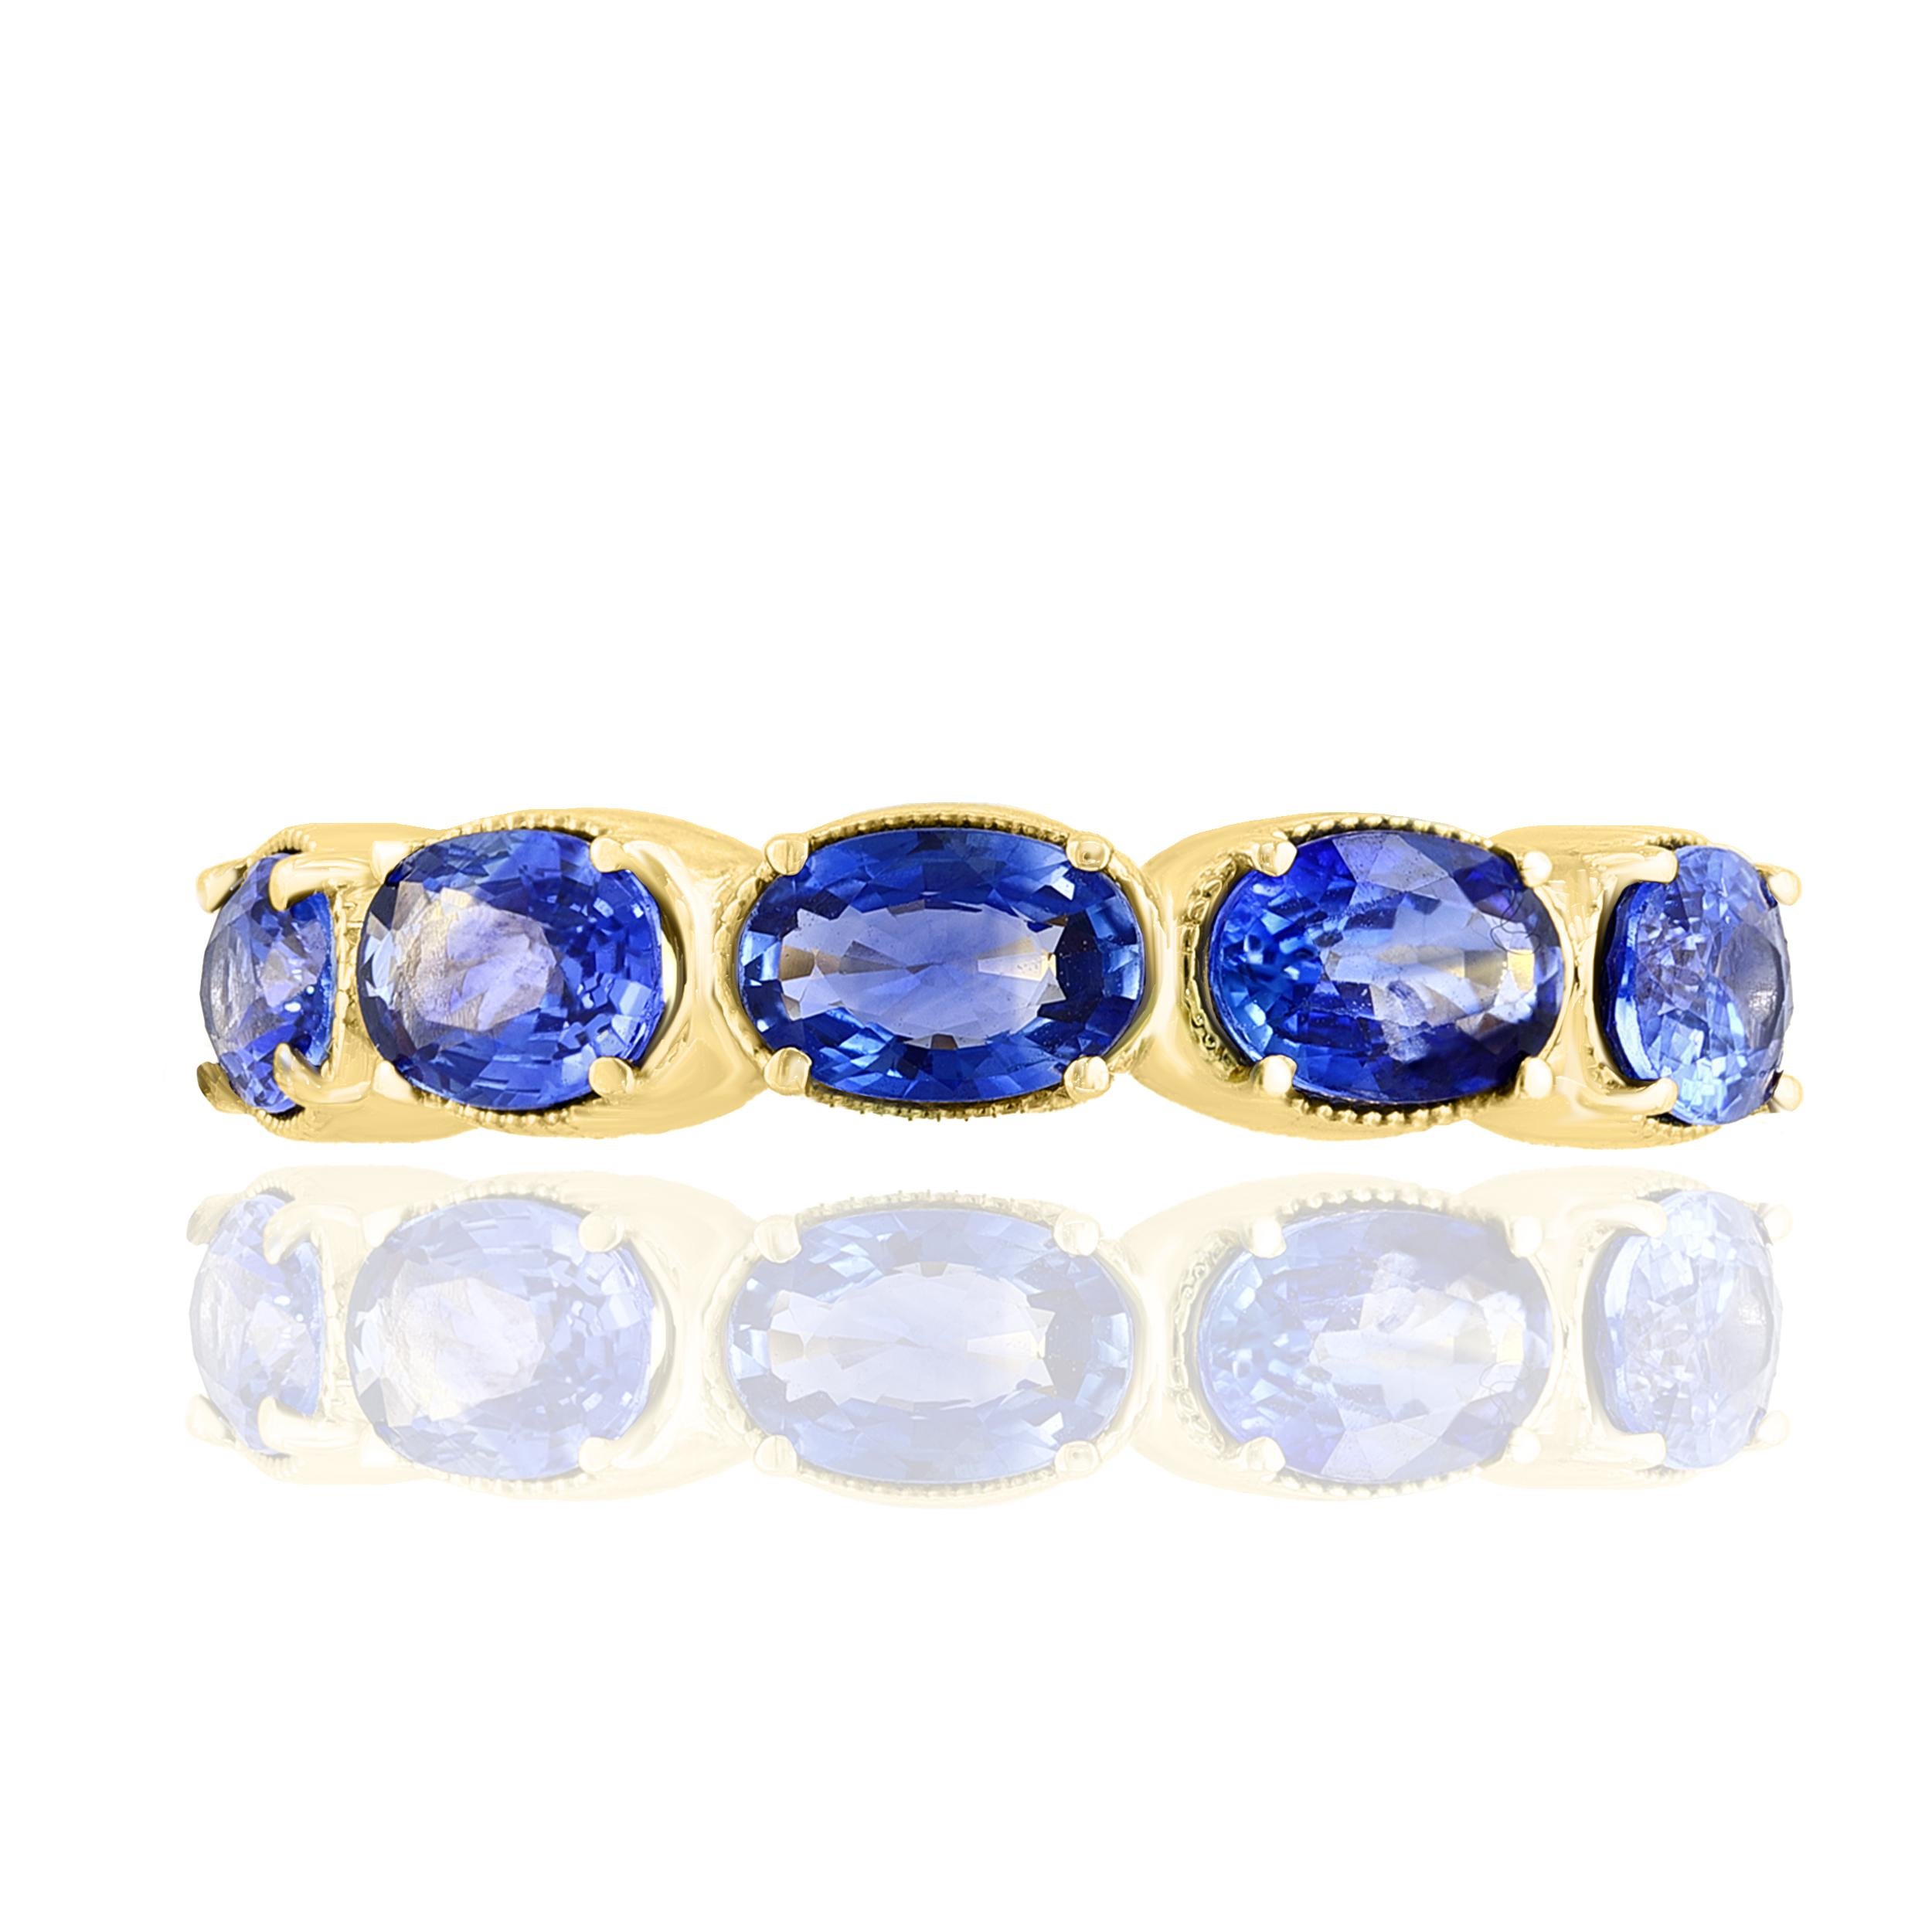 A fashionable and classic wedding band showcasing 5 color-rich blue sapphires weighing 2.76 carats total. Stones secured with a 4 prong setting made with 14 karats yellow gold. A versatile piece that can be worn as a fashionable right-hand ring as